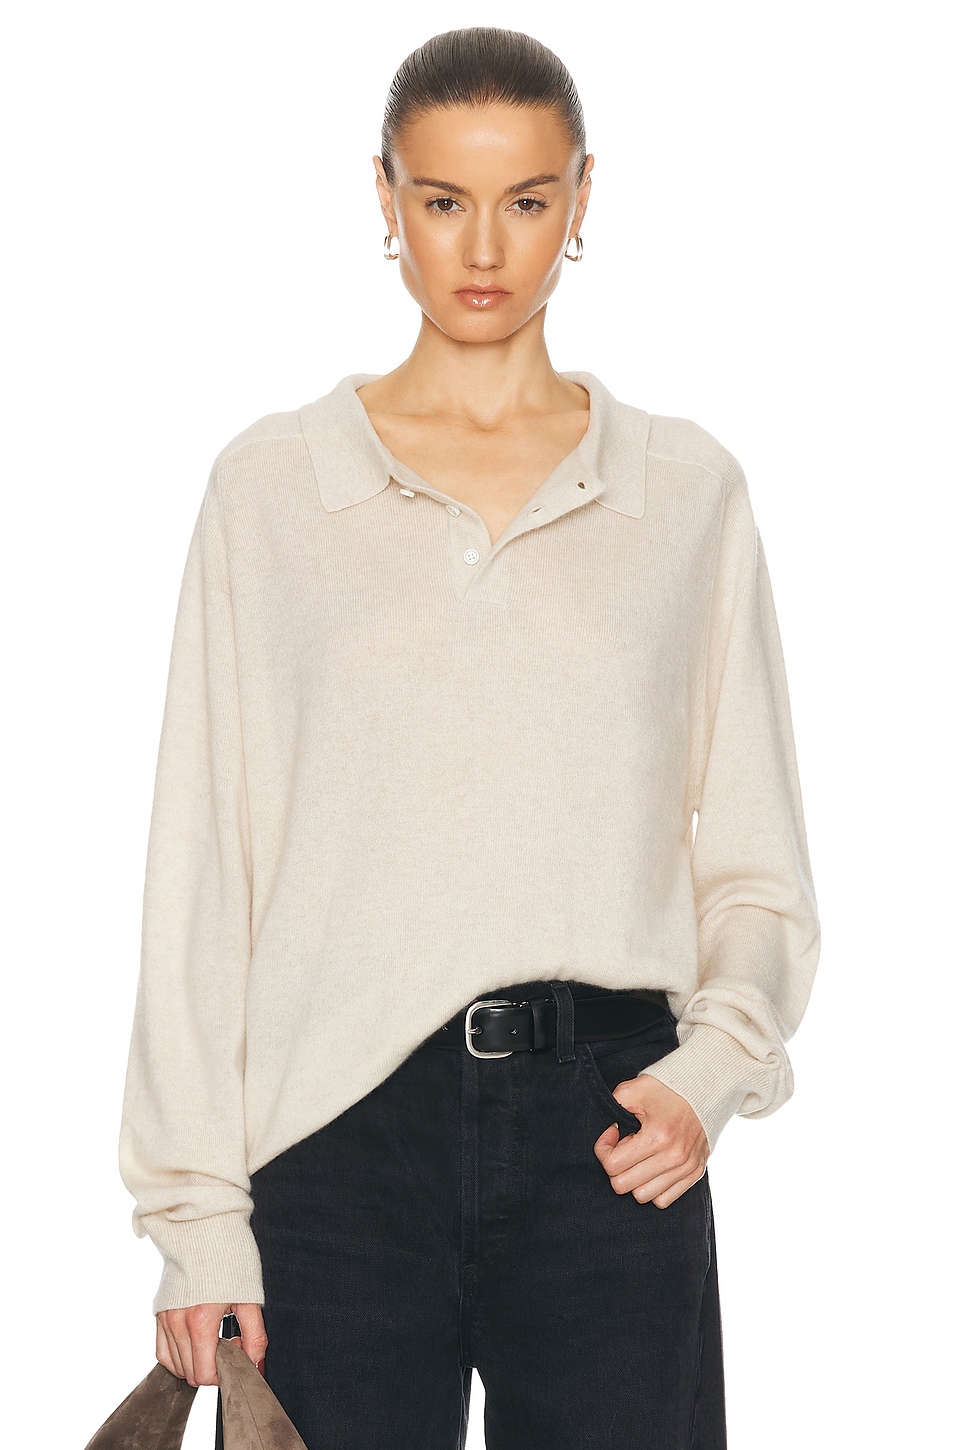 Image 1 of Eterne Brady Cashmere Sweater in Oatmeal